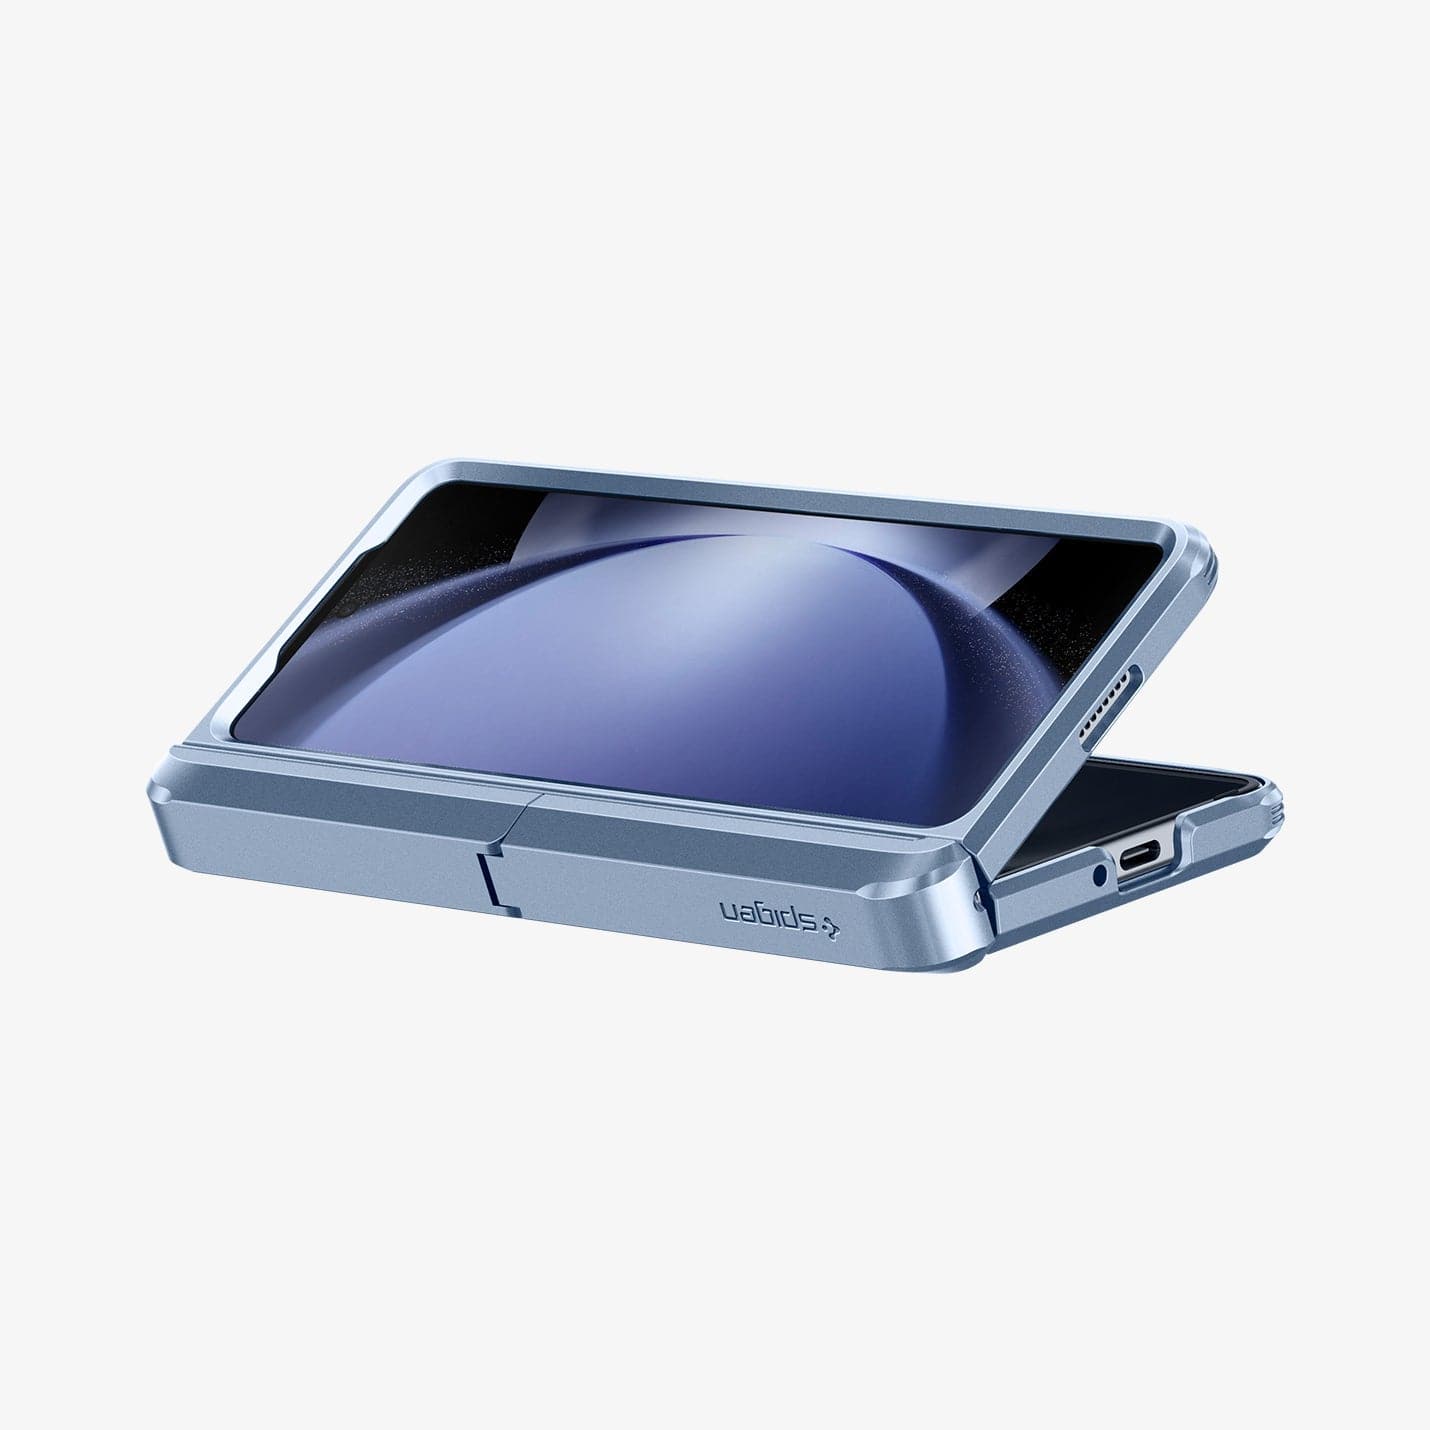 ACS06870 - Galaxy Z Fold 5 Case Tough Armor Pro P in sierra blue showing the front and partial inside with phone slightly open